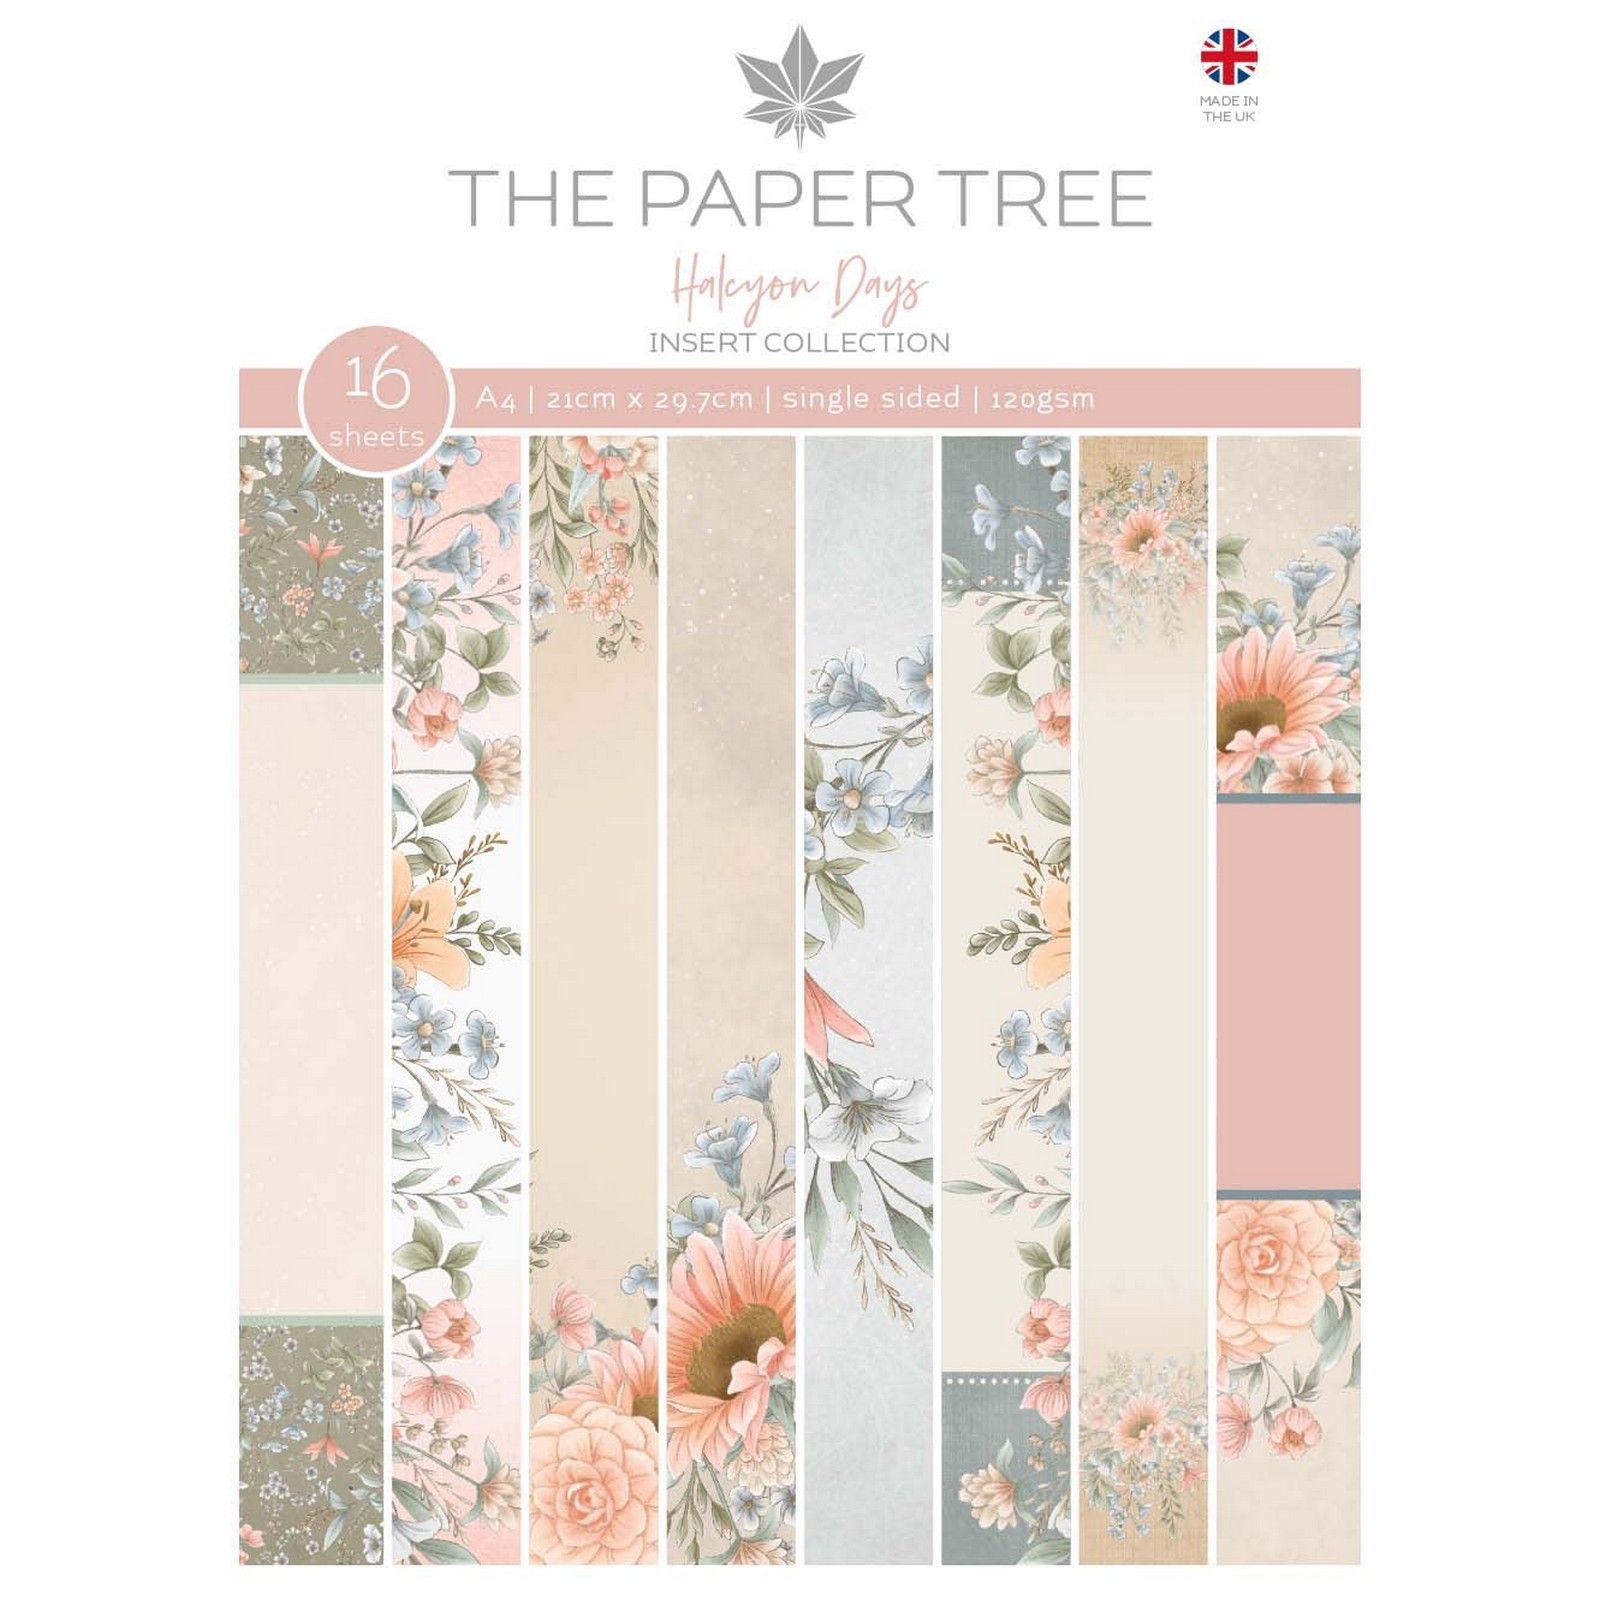 The Paper Tree • Halcyon days insert collection